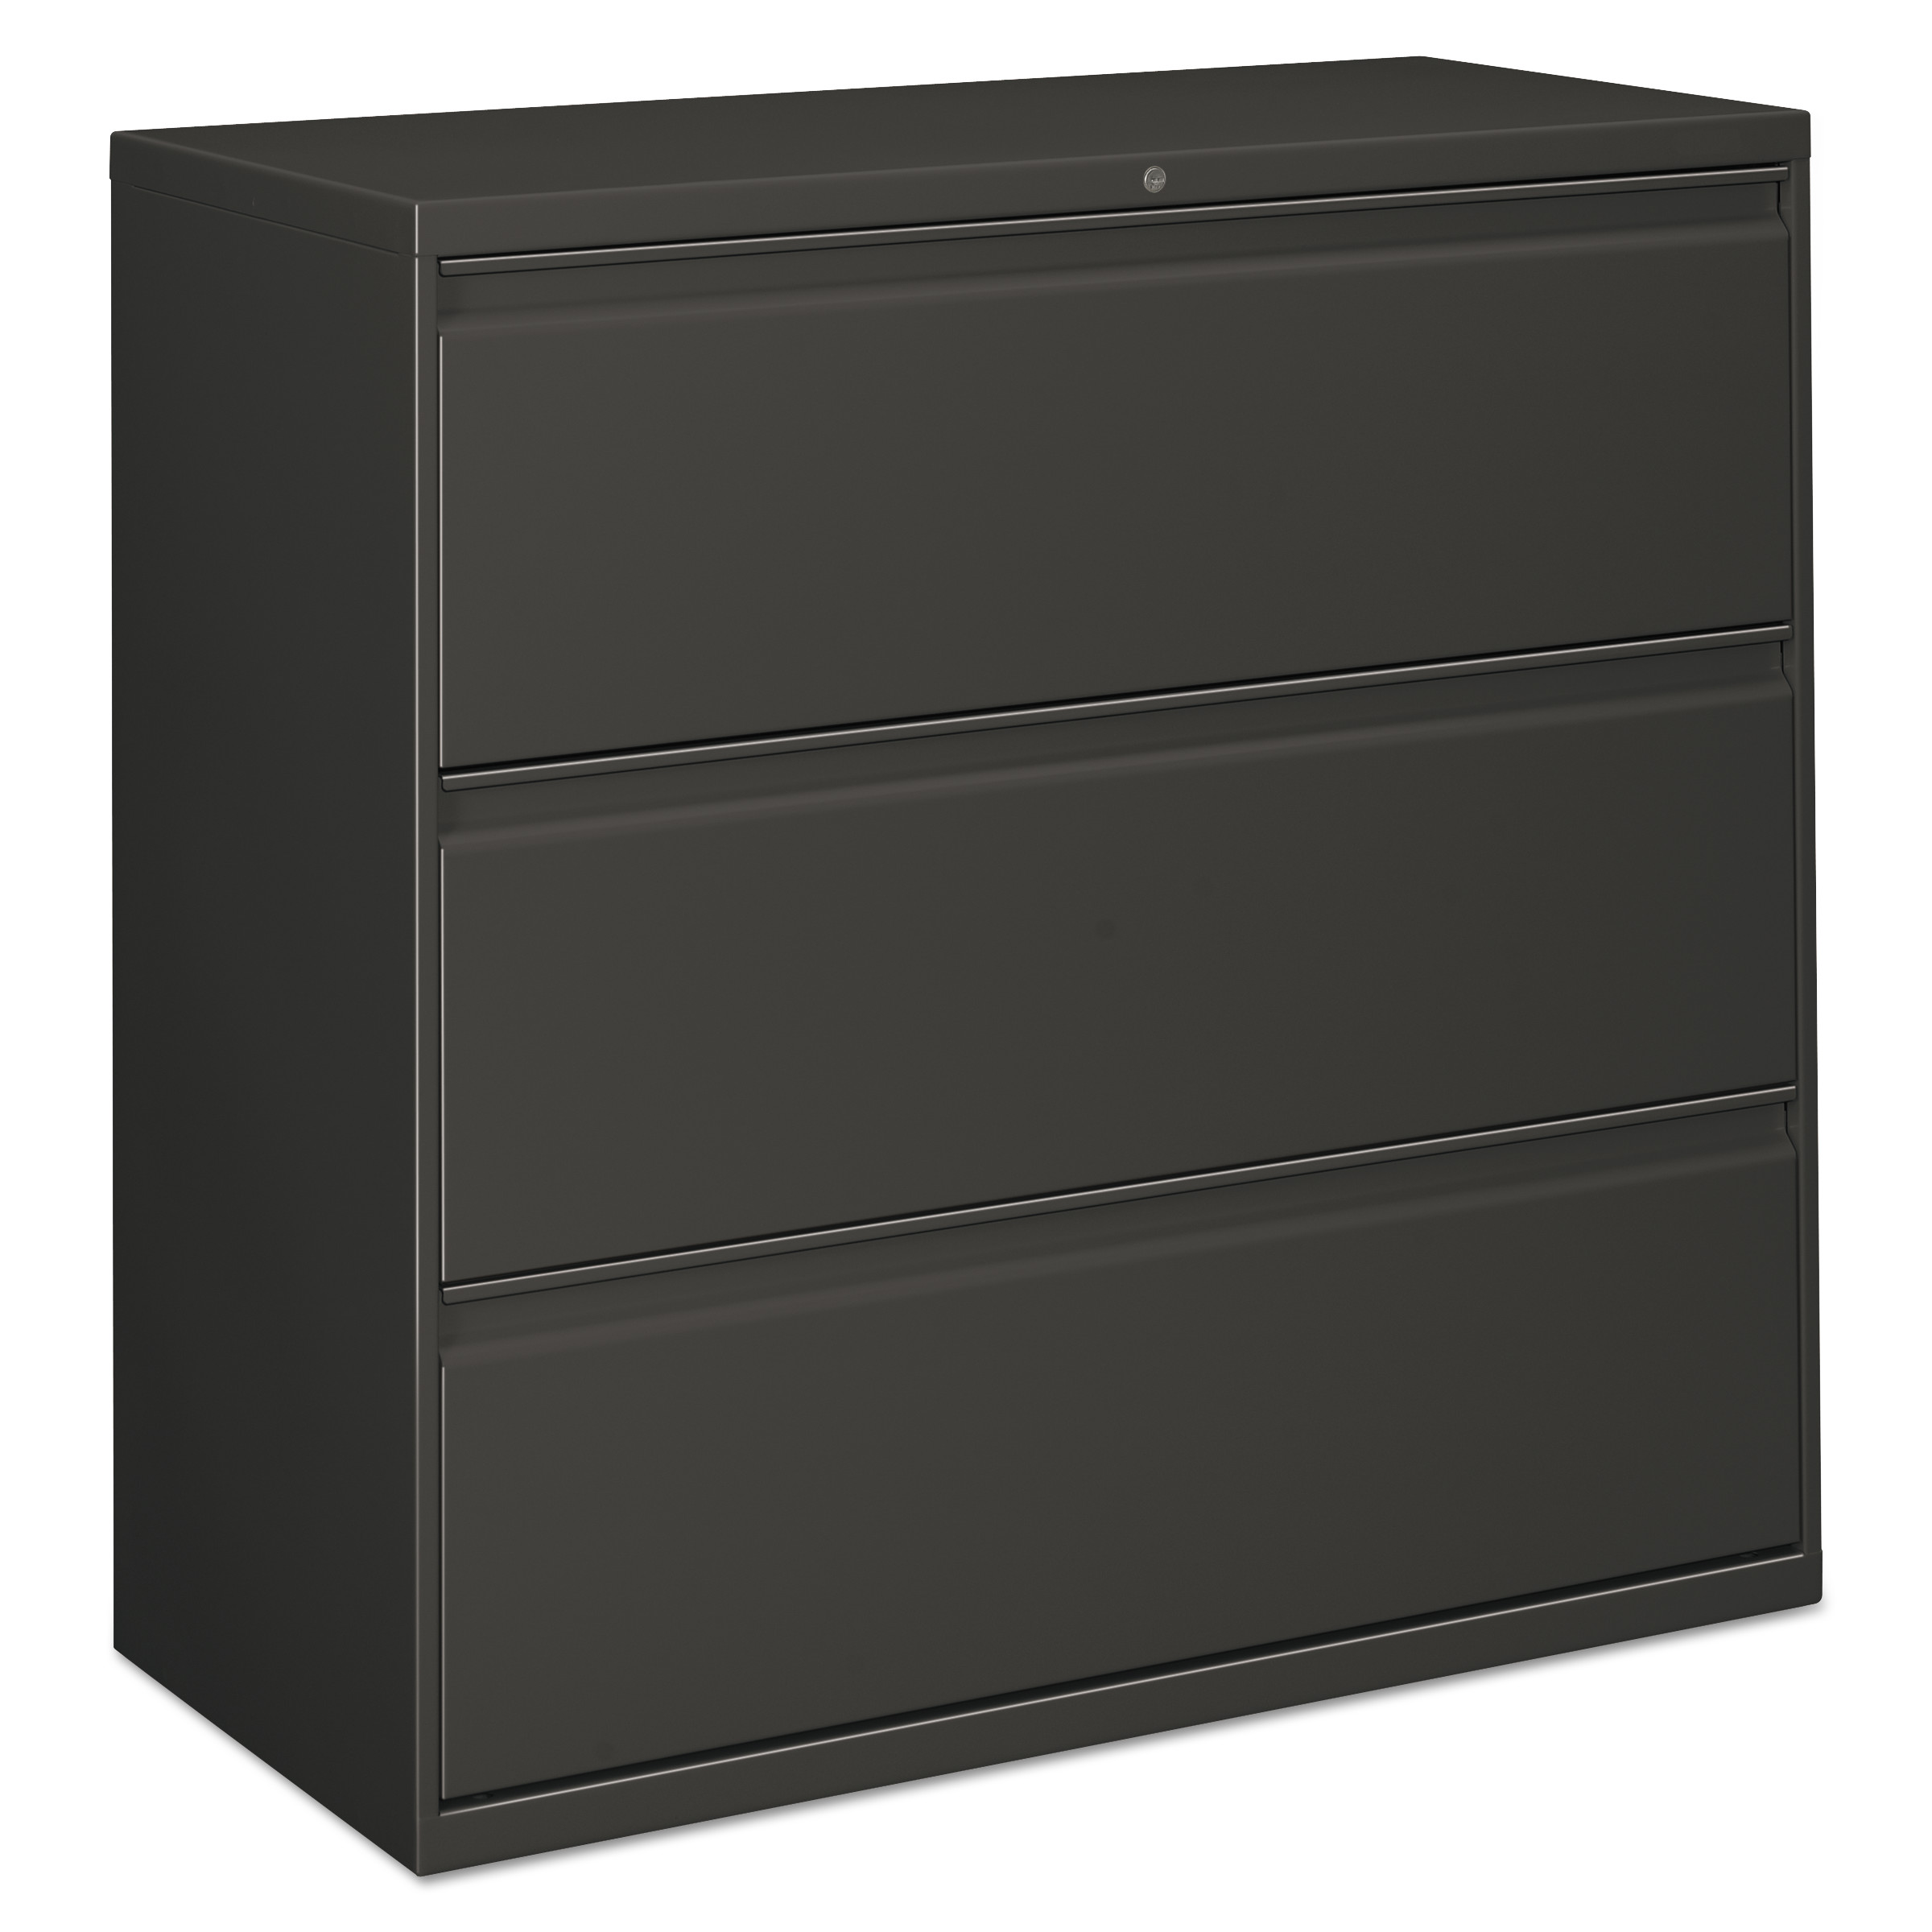 Three-Drawer Lateral File Cabinet, 42w x 18d x 39 1/2h, Charcoal